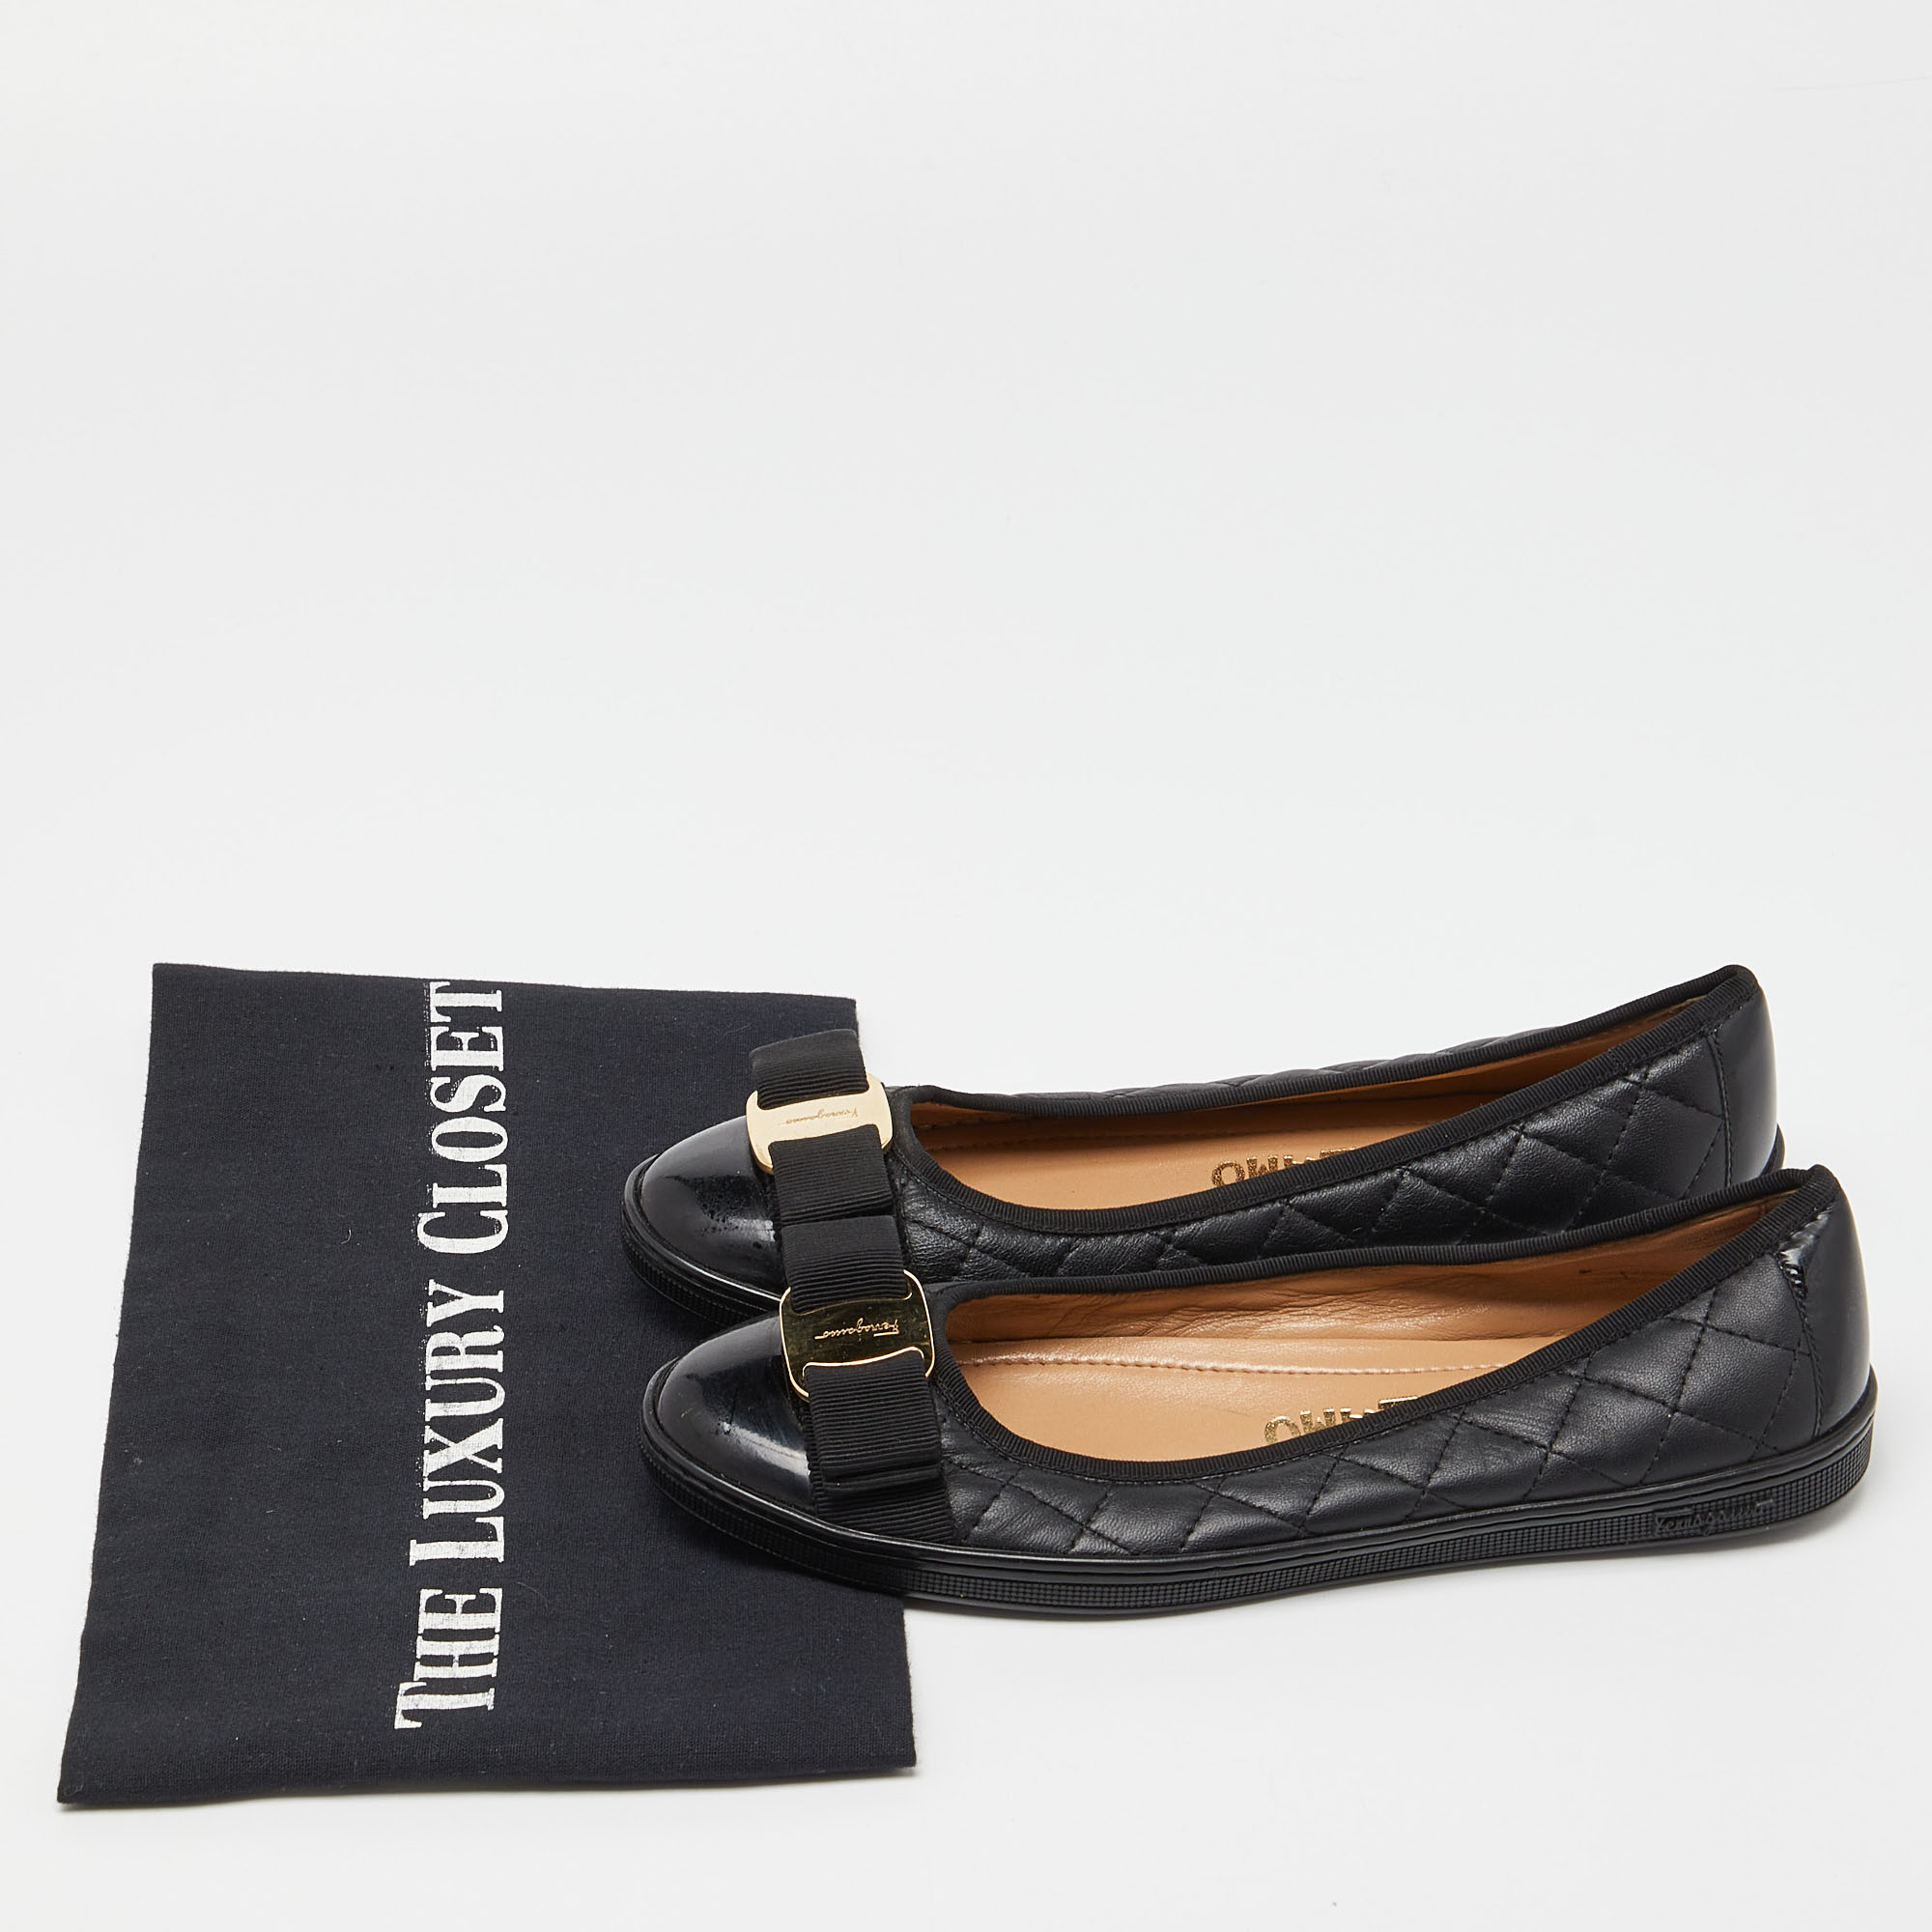 Salvatore Ferragamo Black Quilted Leather And Patent Varina Ballet Flats Size 35.5